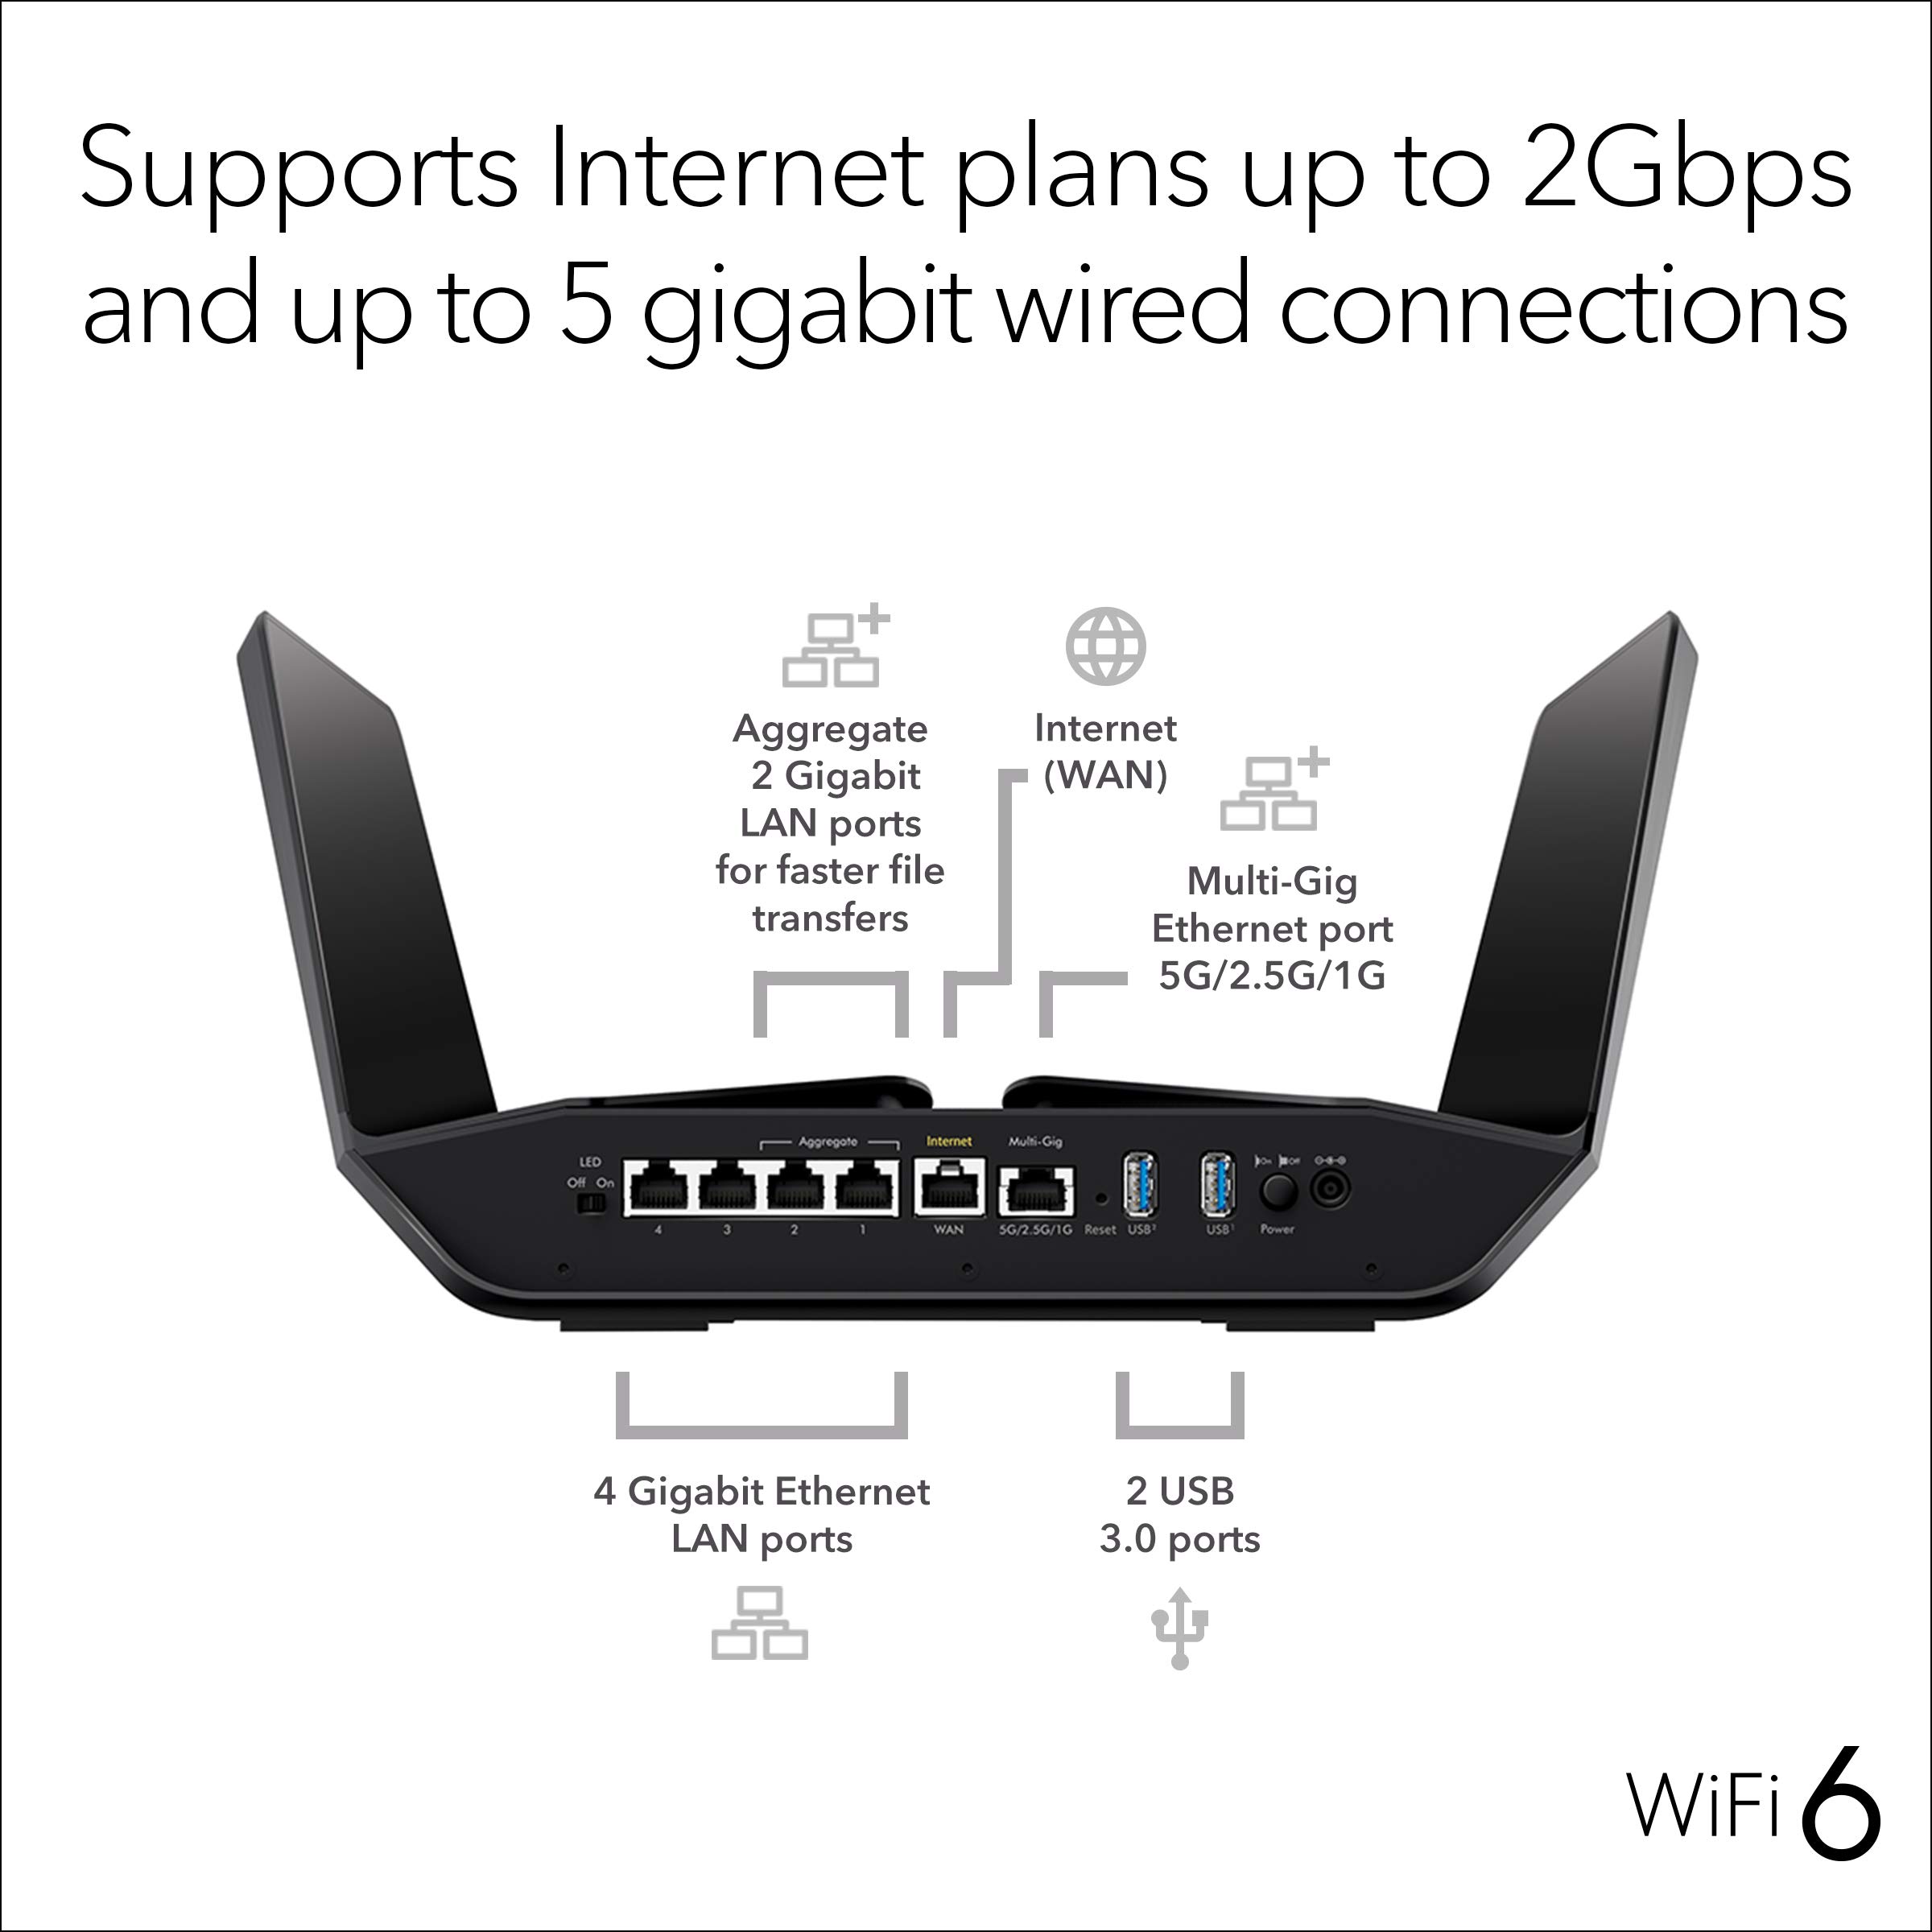 NETGEAR Nighthawk WiFi 6 Router (RAX120) 12-Stream Dual-Band Gigabit Router, AX6000 Wireless Speed (Up to 6 Gbps), Coverage Up to 3,500 sq.ft. and 30 Devices